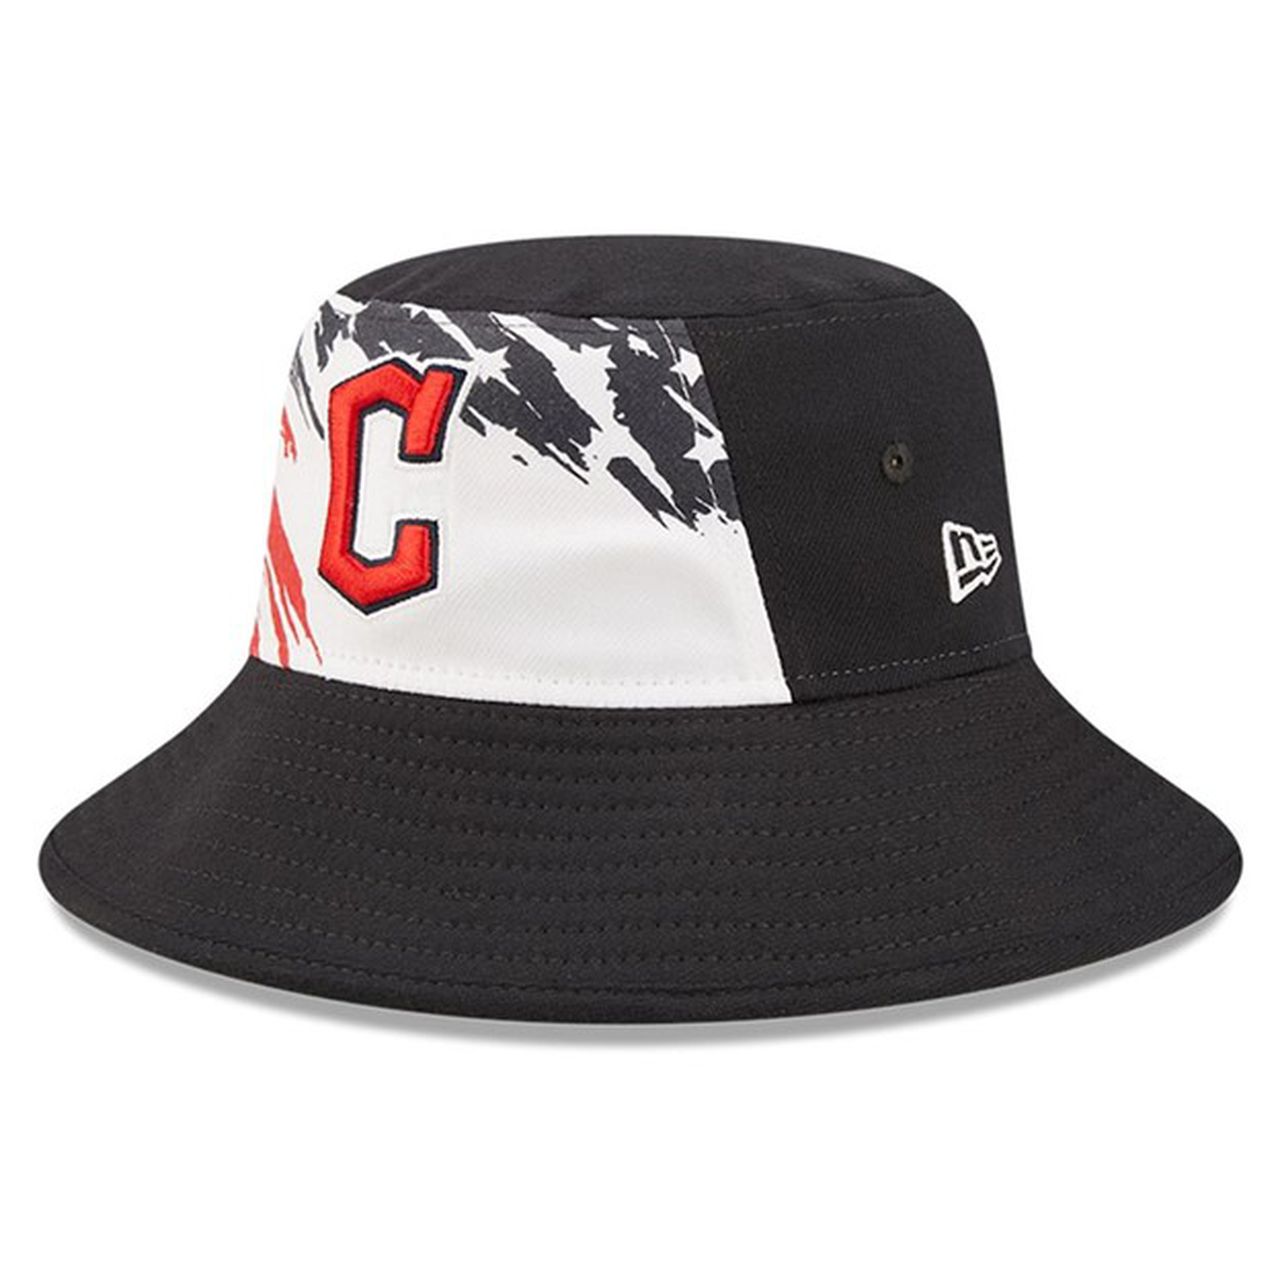 Stars And Stripes Hat Collection from Fanatics